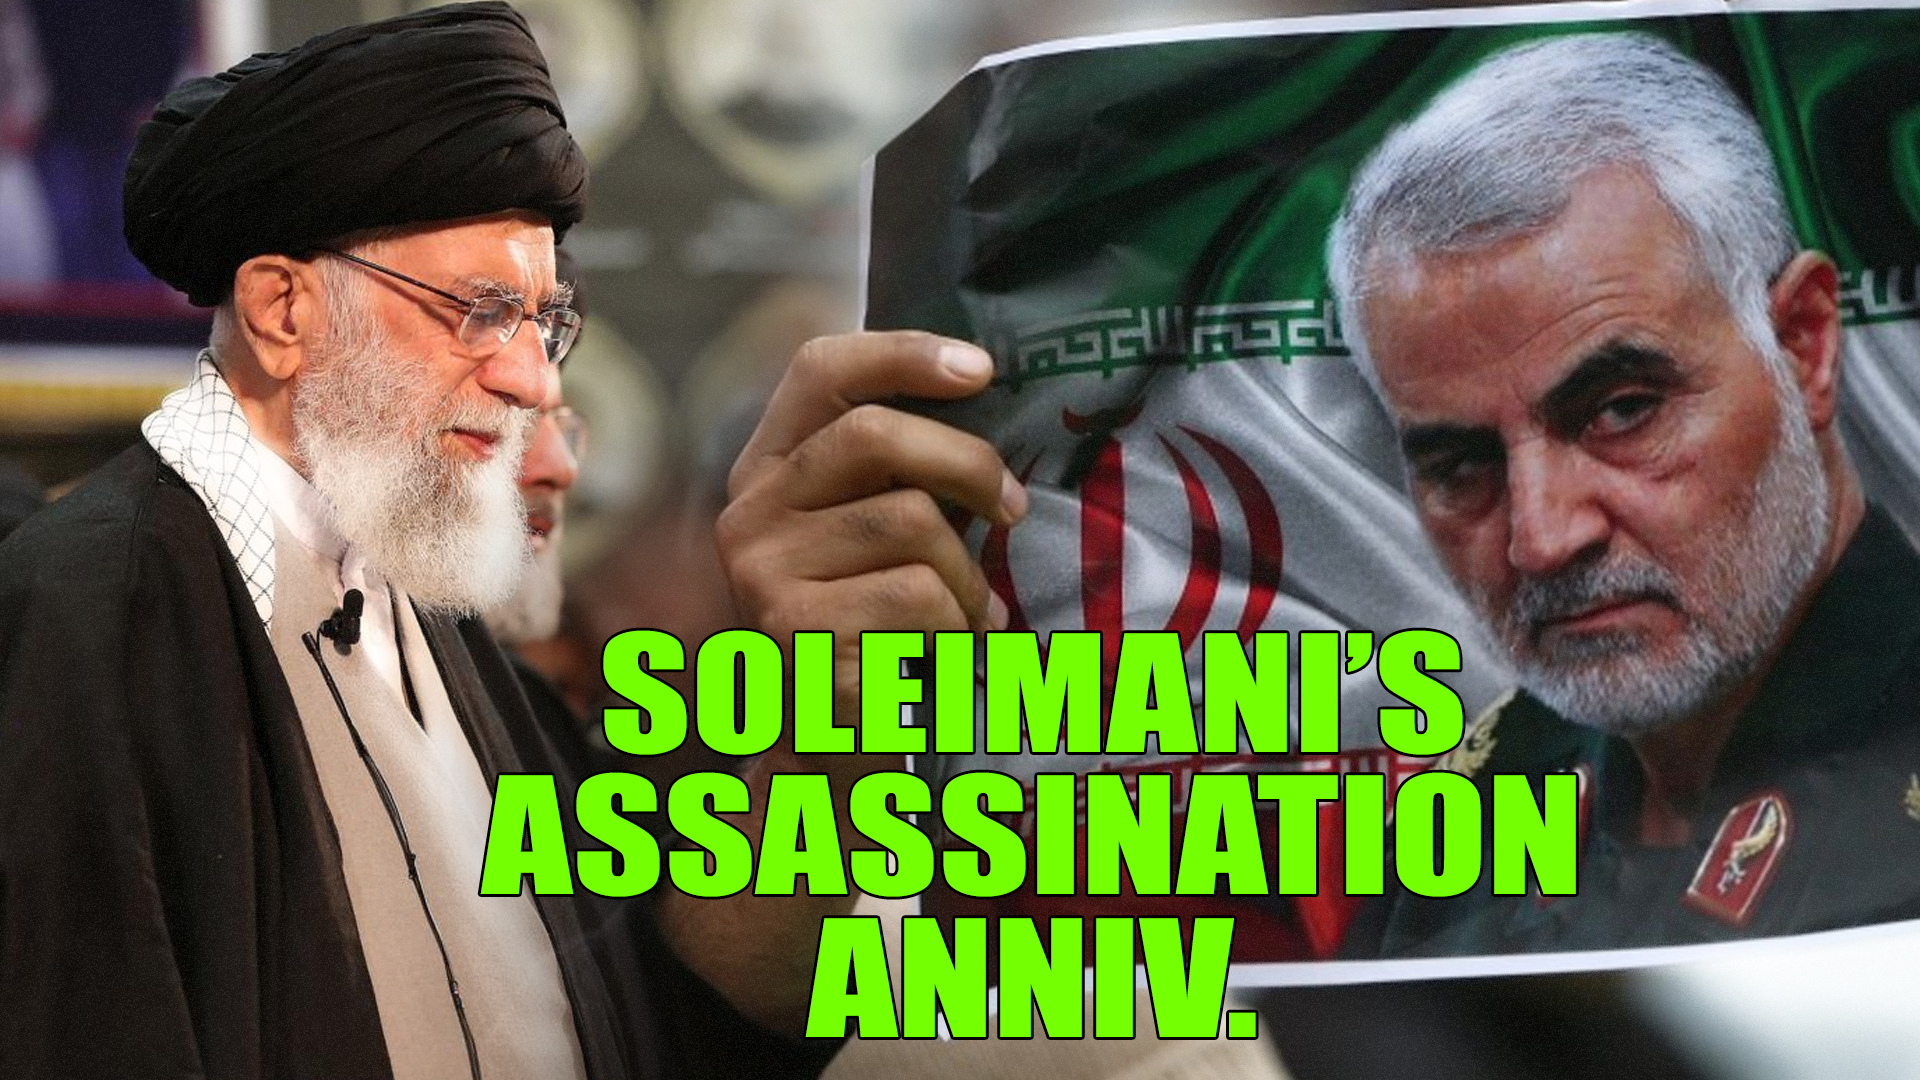 Martyr Soleimani's global appeal, especially against imperialism